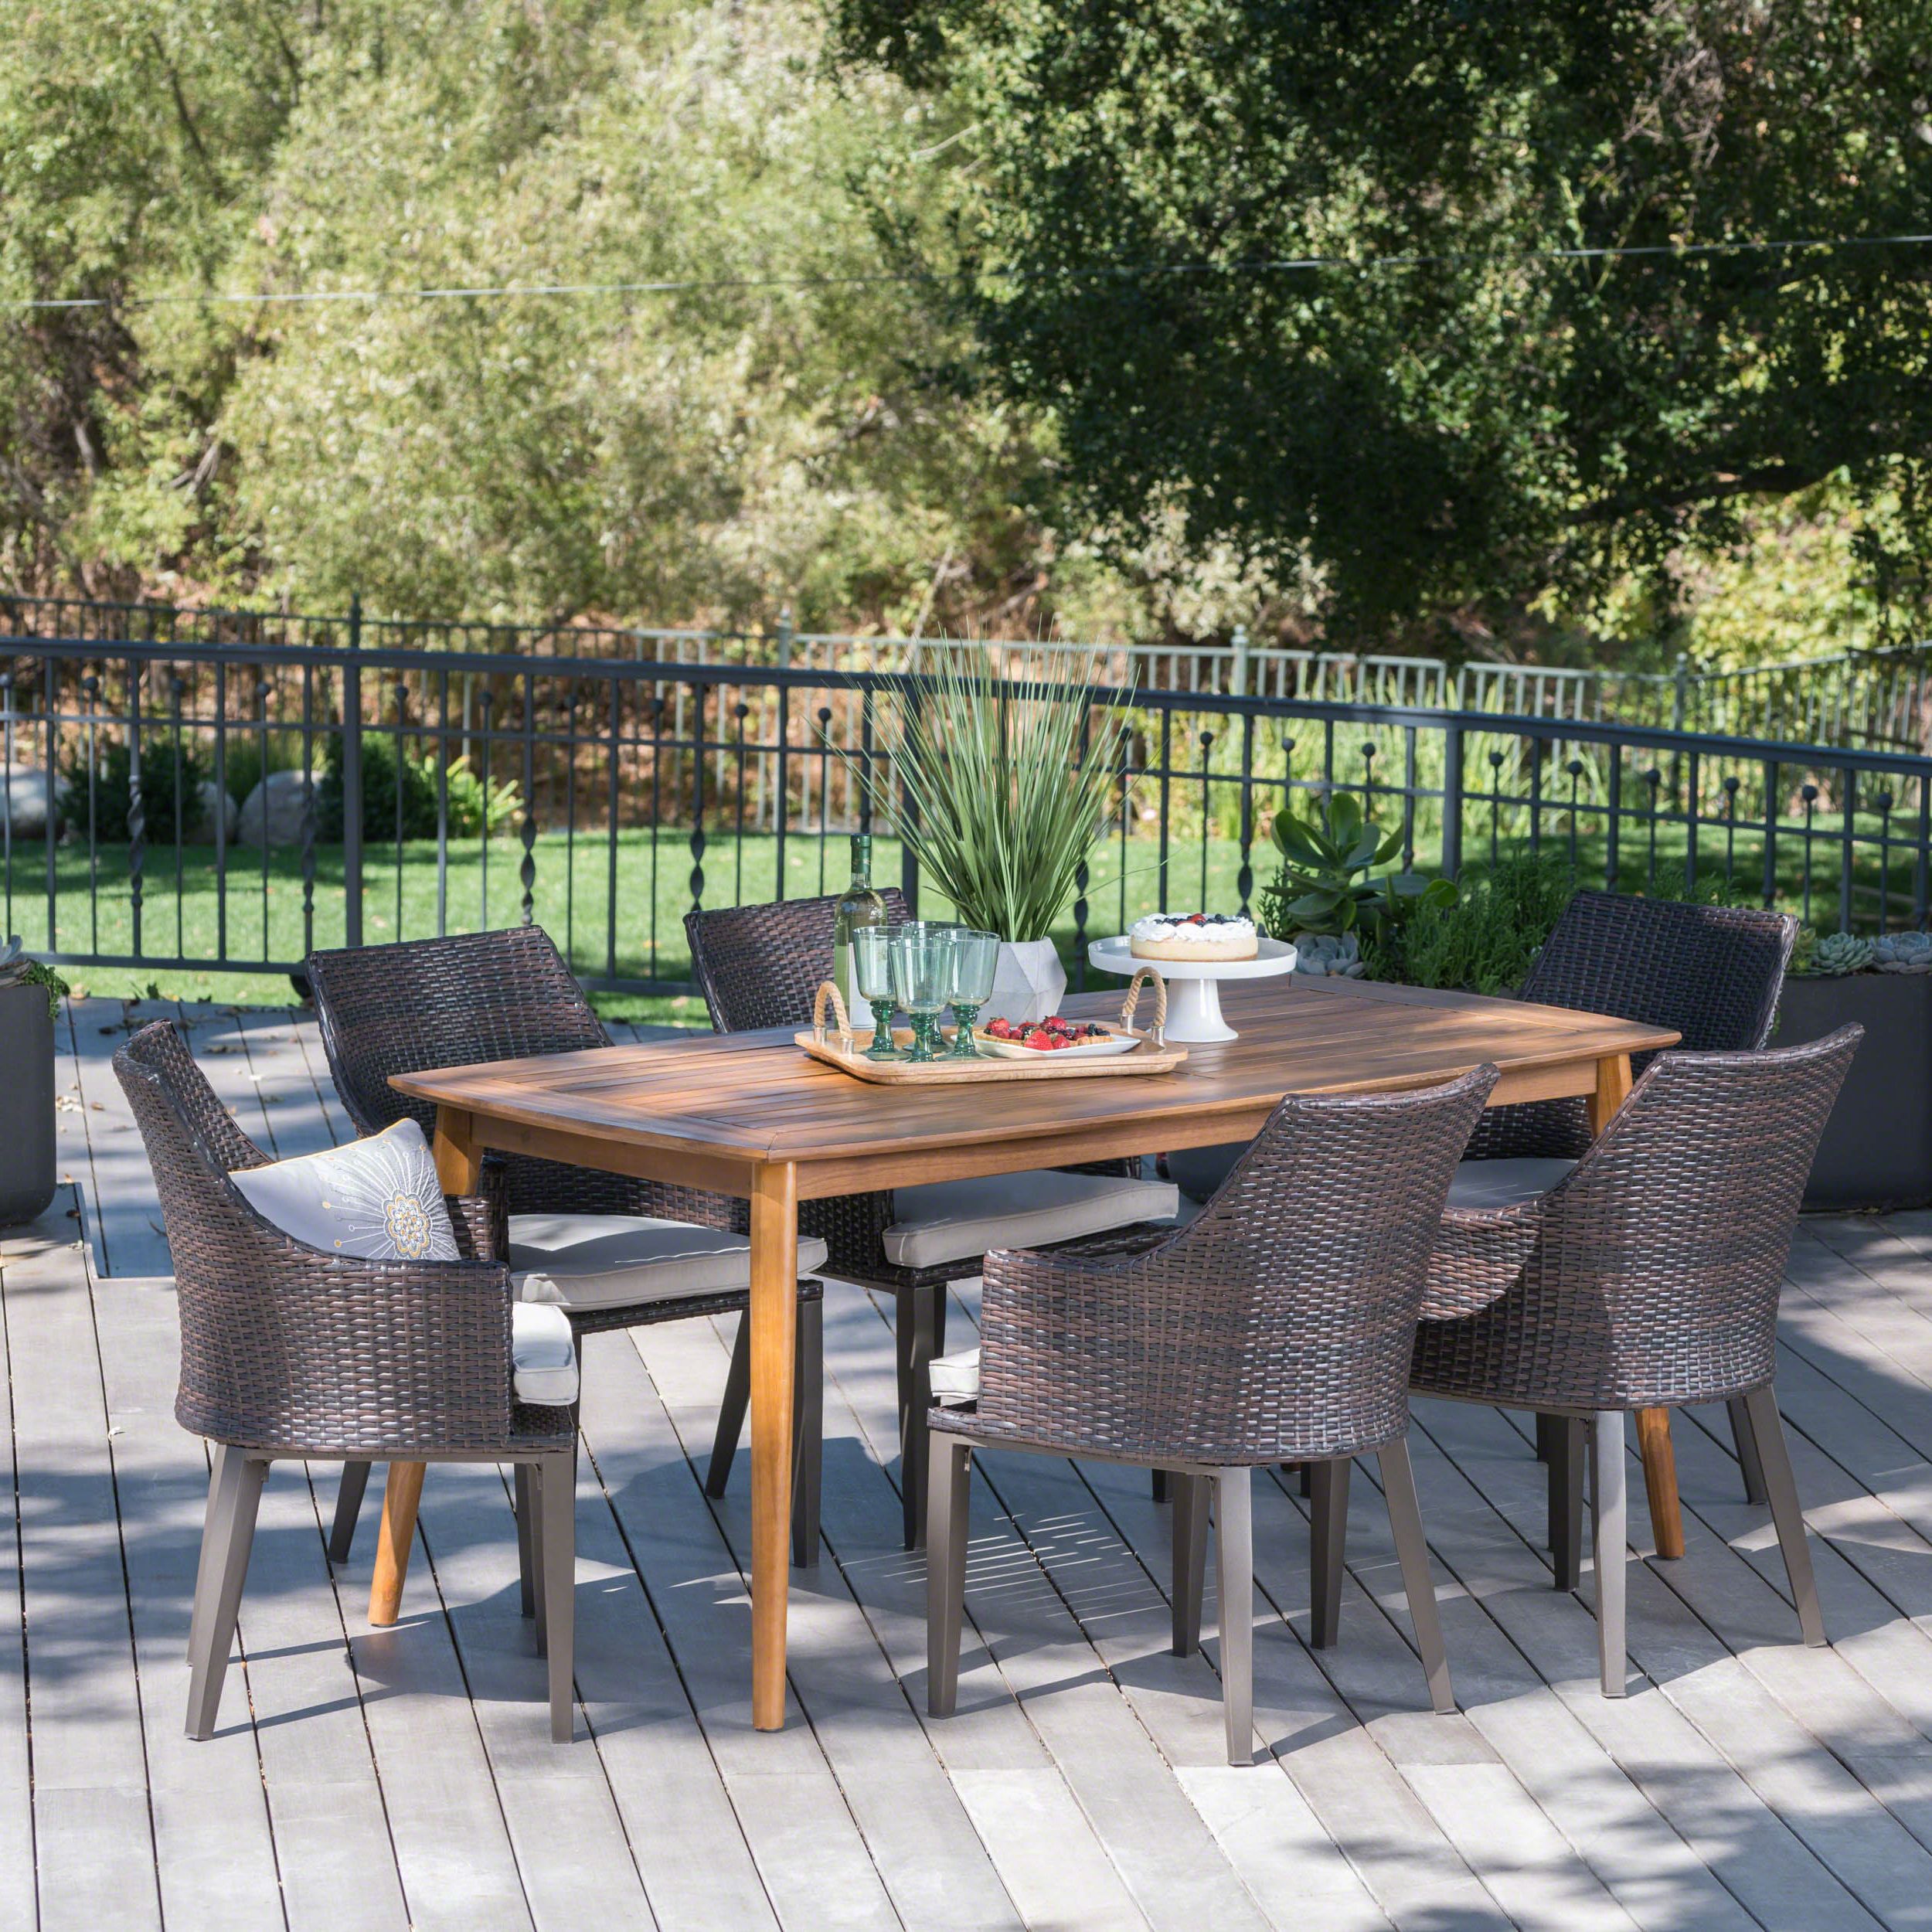 Teak Outdoor Square Dining Sets In Well Known Alexa Outdoor 7 Piece Wicker Rectangular Dining Set With Acacia Wood (View 9 of 15)